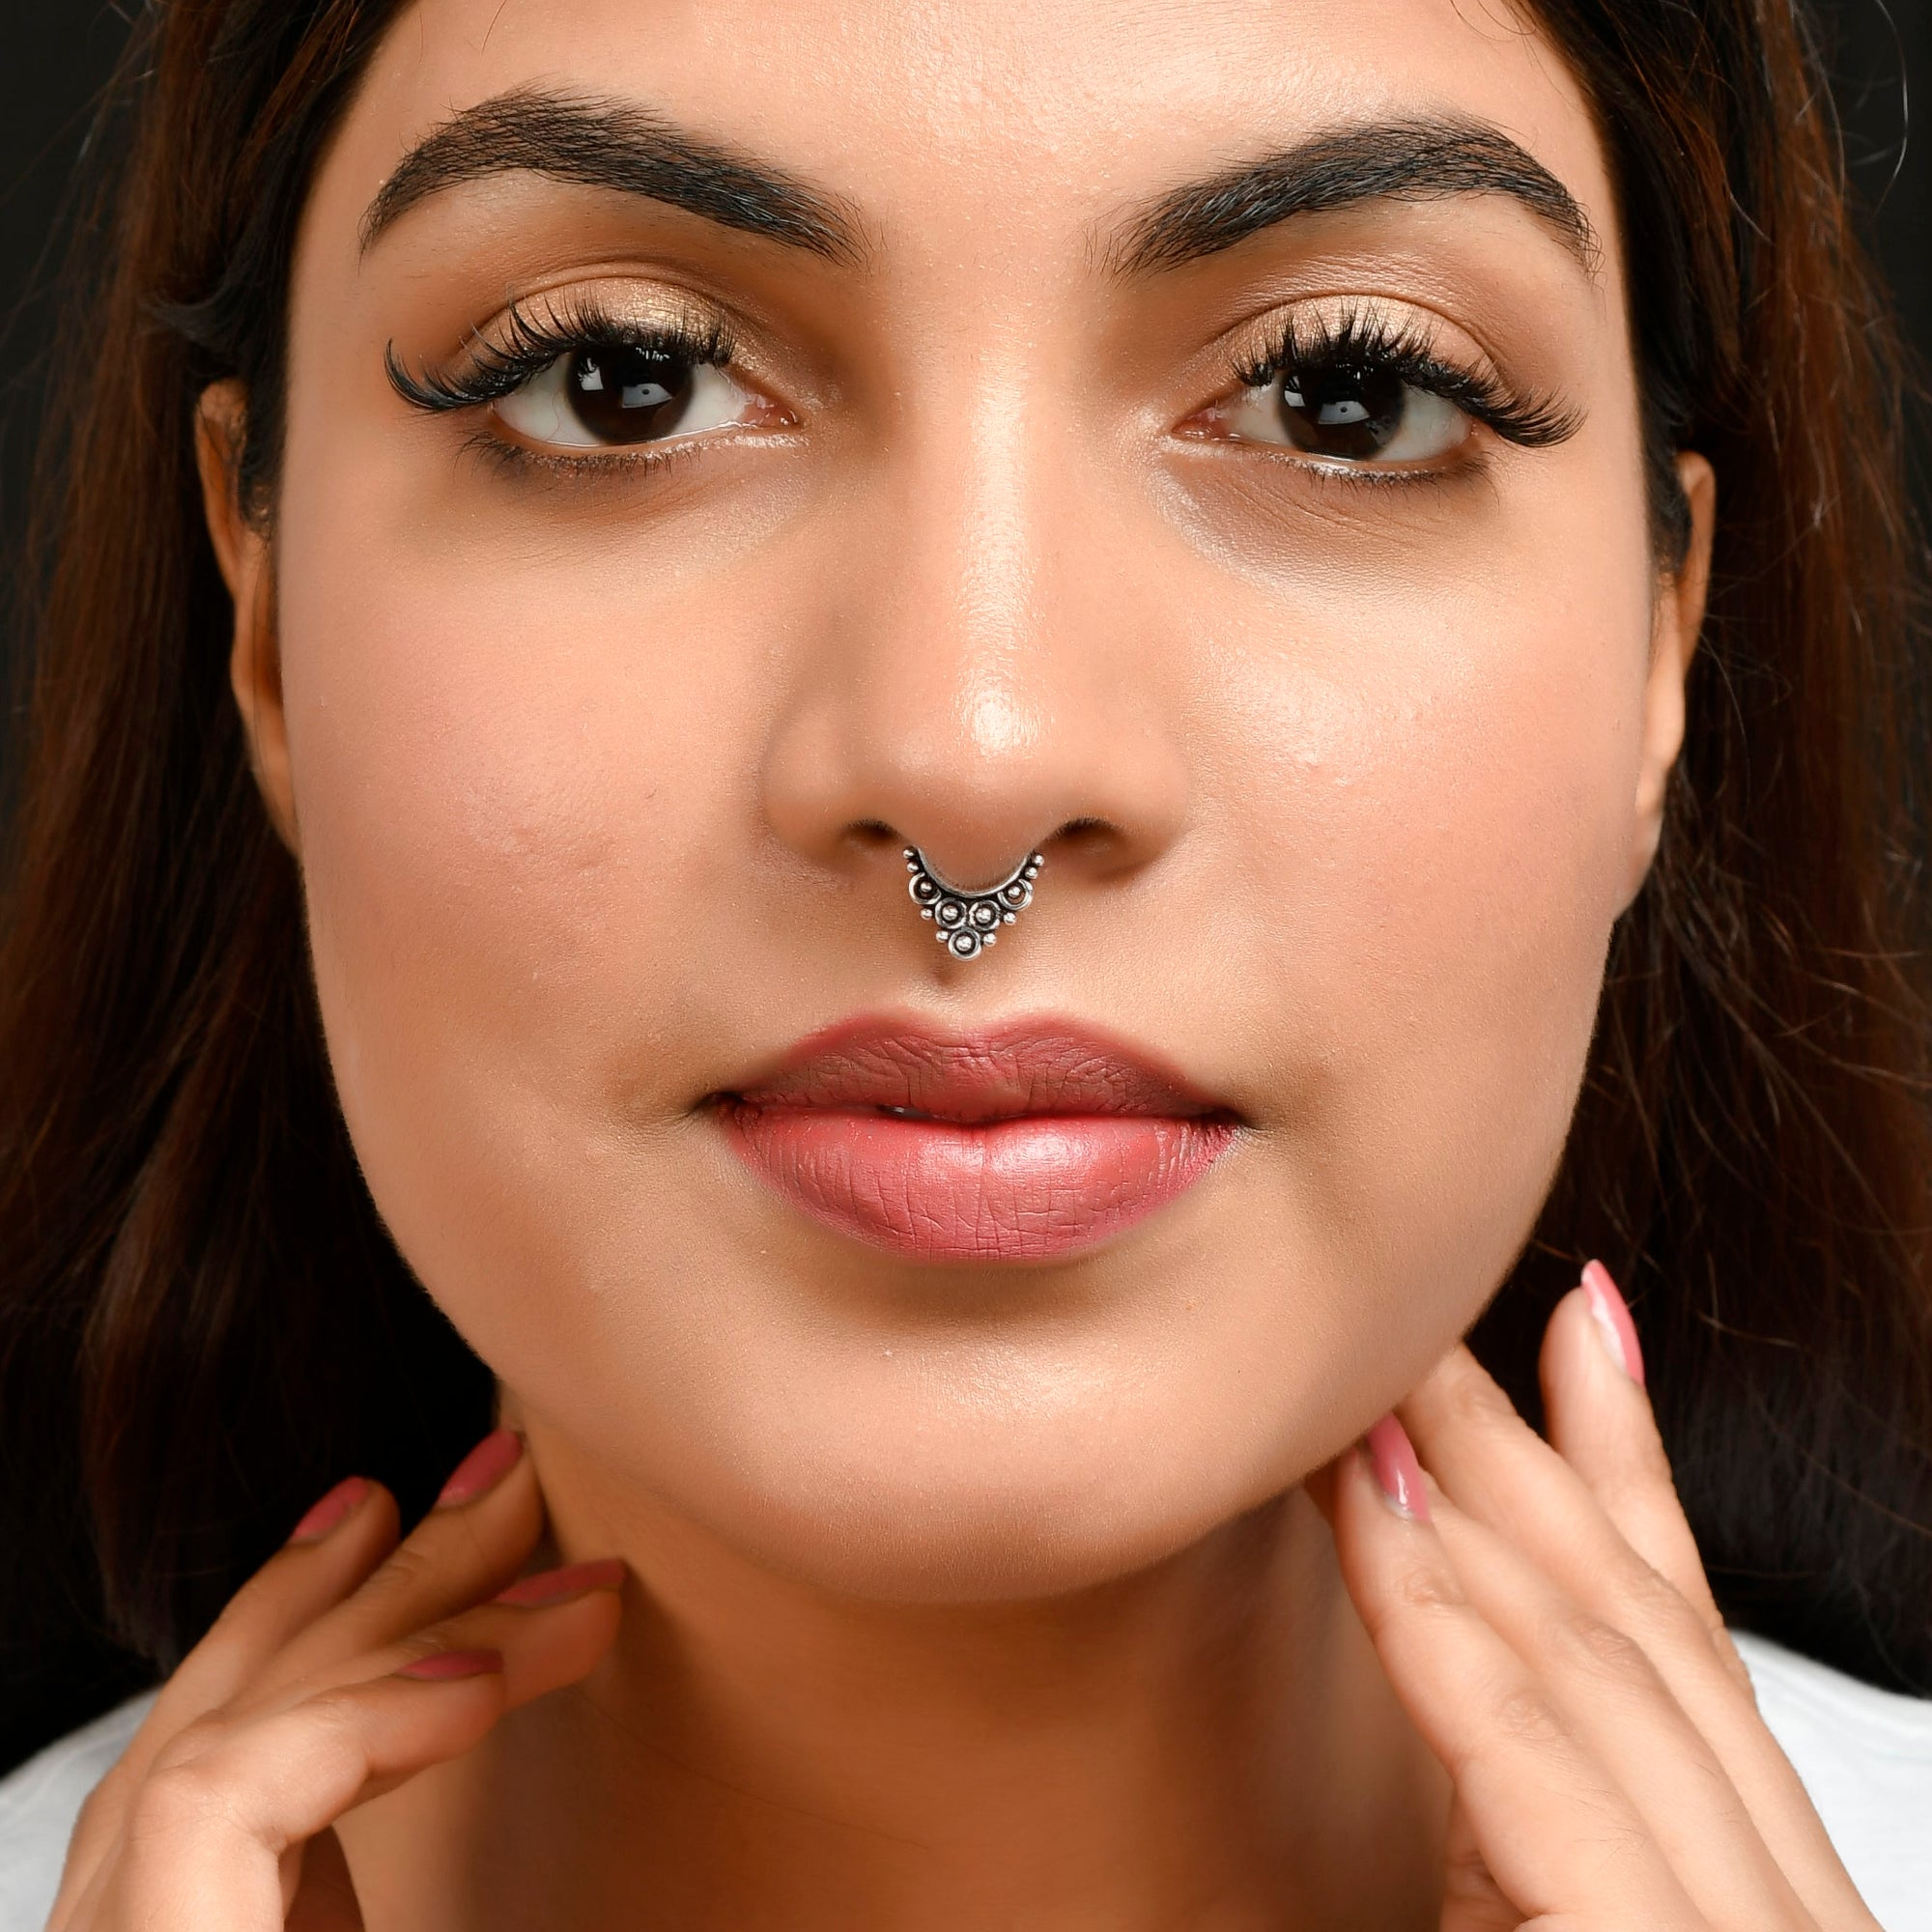 Dropship 18G 925 Sterling Silver Fake Nose Rings Hoop For Women Men Lip Rings  Non Pierced Ear Cuff Earrings Clip On Cartilage Septum Rings Body Piercing  to Sell Online at a Lower